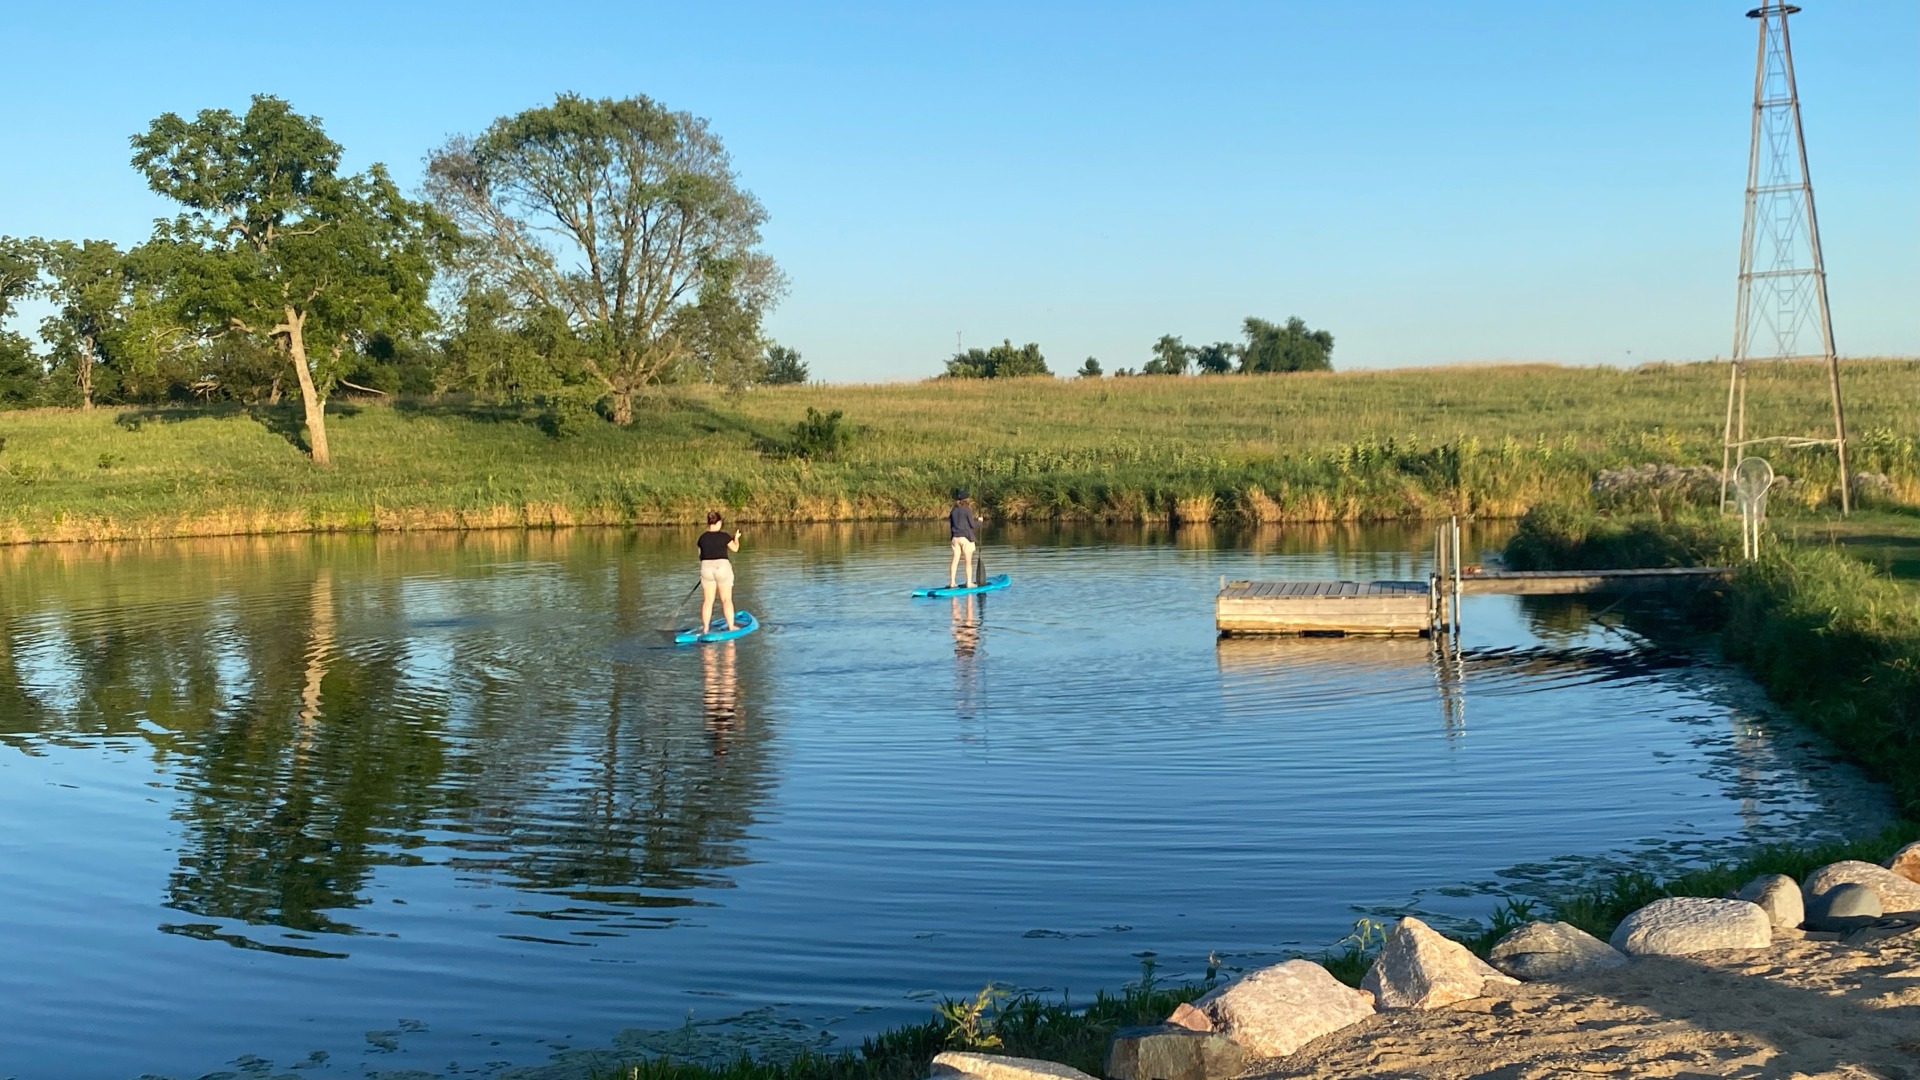 Pond for paddle boarding in Kellogg, Iowa. The waters are clear blue, trees are vibrant and healthy, and skies are very blue.